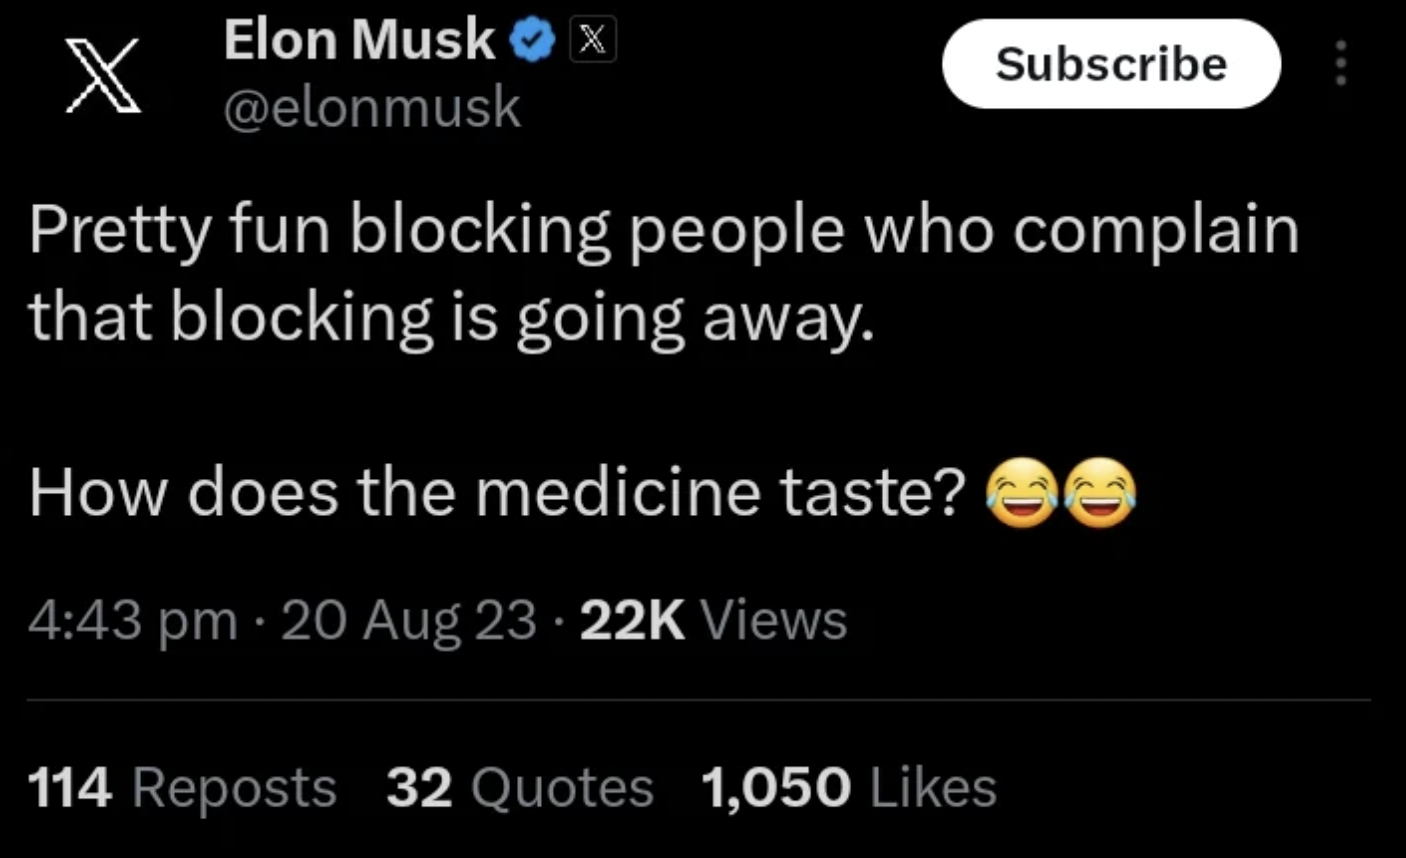 elon musk graveyard tweet - Elon Musk X X Pretty fun blocking people who complain that blocking is going away. How does the medicine taste? 20 Aug Views Subscribe 114 Reposts 32 Quotes 1,050